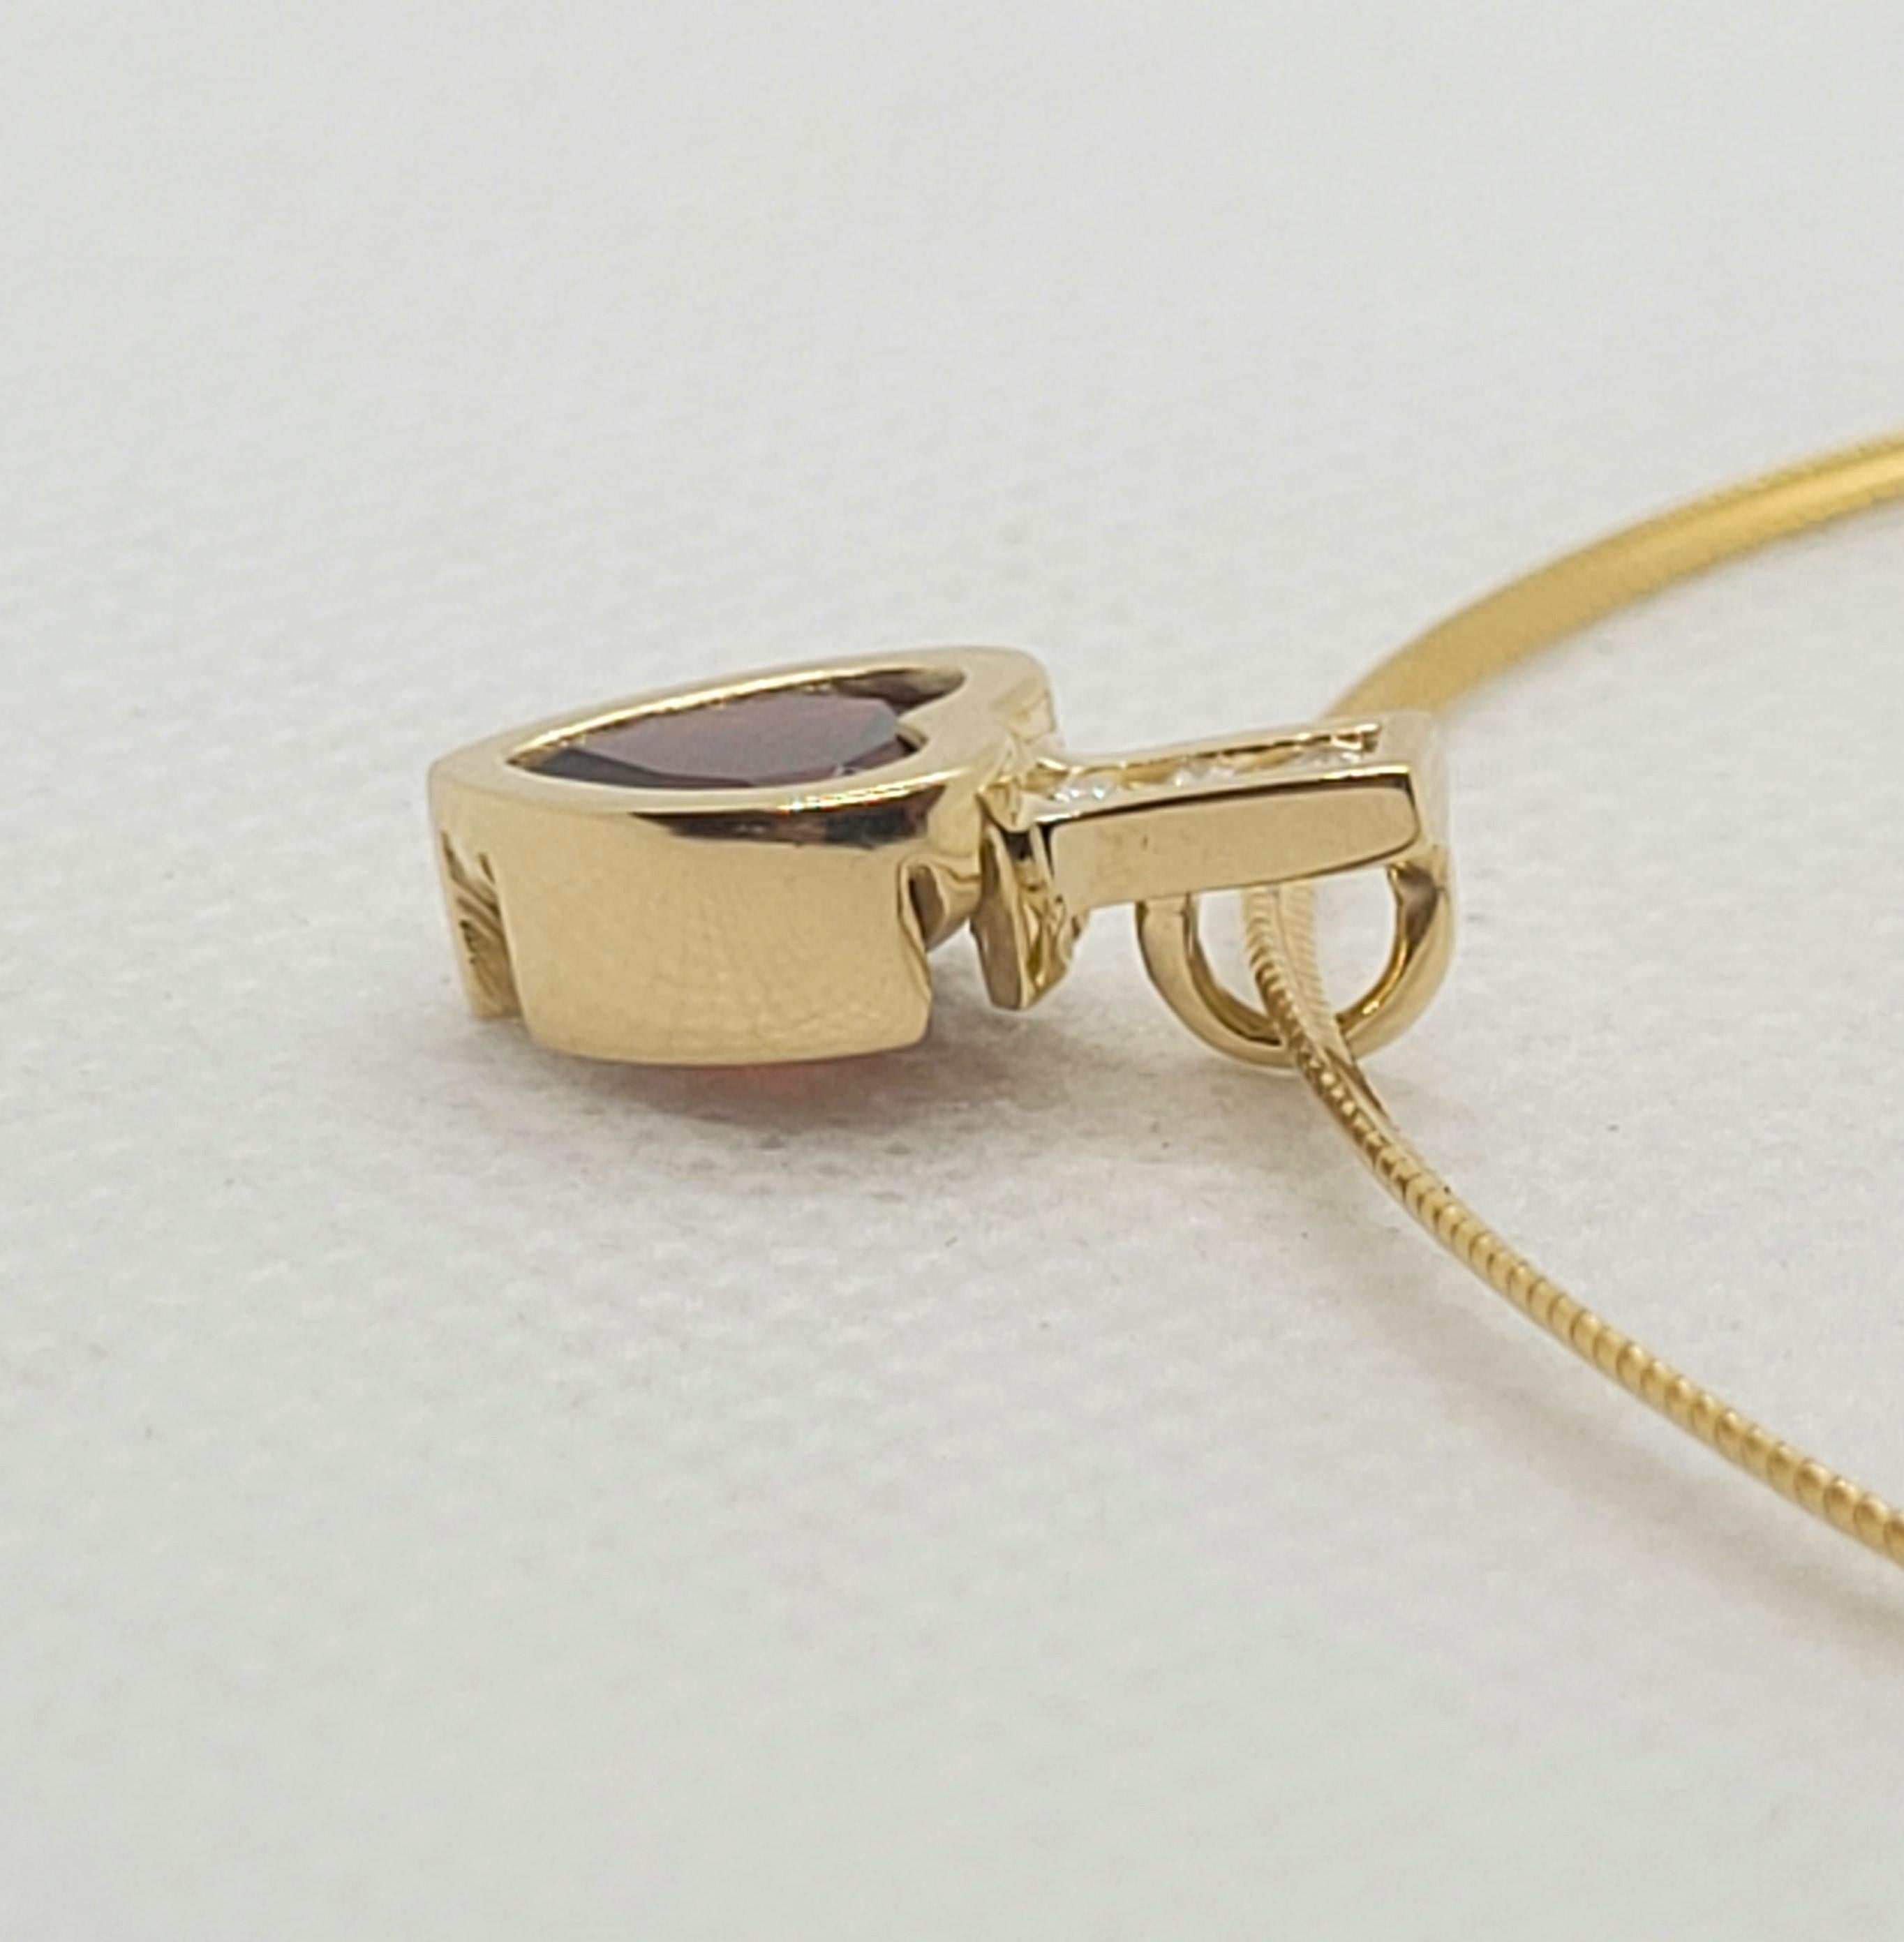 Beautiful 14kt yellow gold pendant with a heart-shaped garnet gemstone accented with 3 round brilliant diamonds of approximately .07cttw.  The garnet and diamonds are in very good condition and this pendant appears hardly worn; the diamond quality